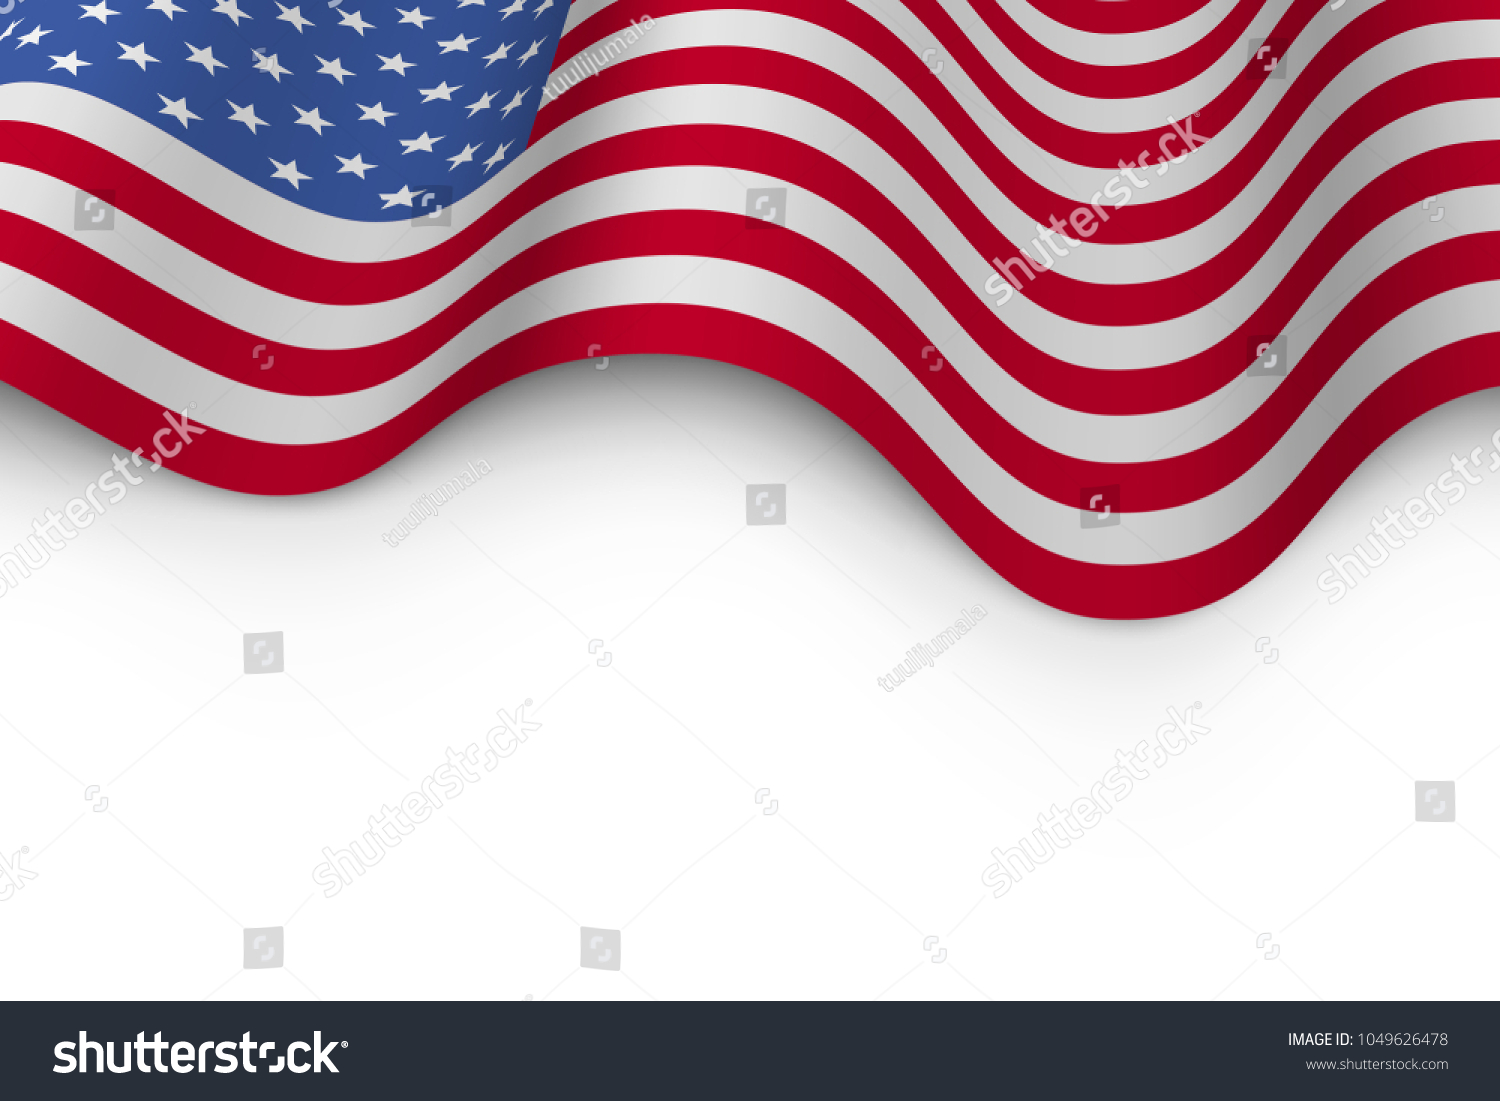 Wavy Flag of United States of America with Shadow. USA Flag Background with white Copy Space. Vector Illustration. #1049626478